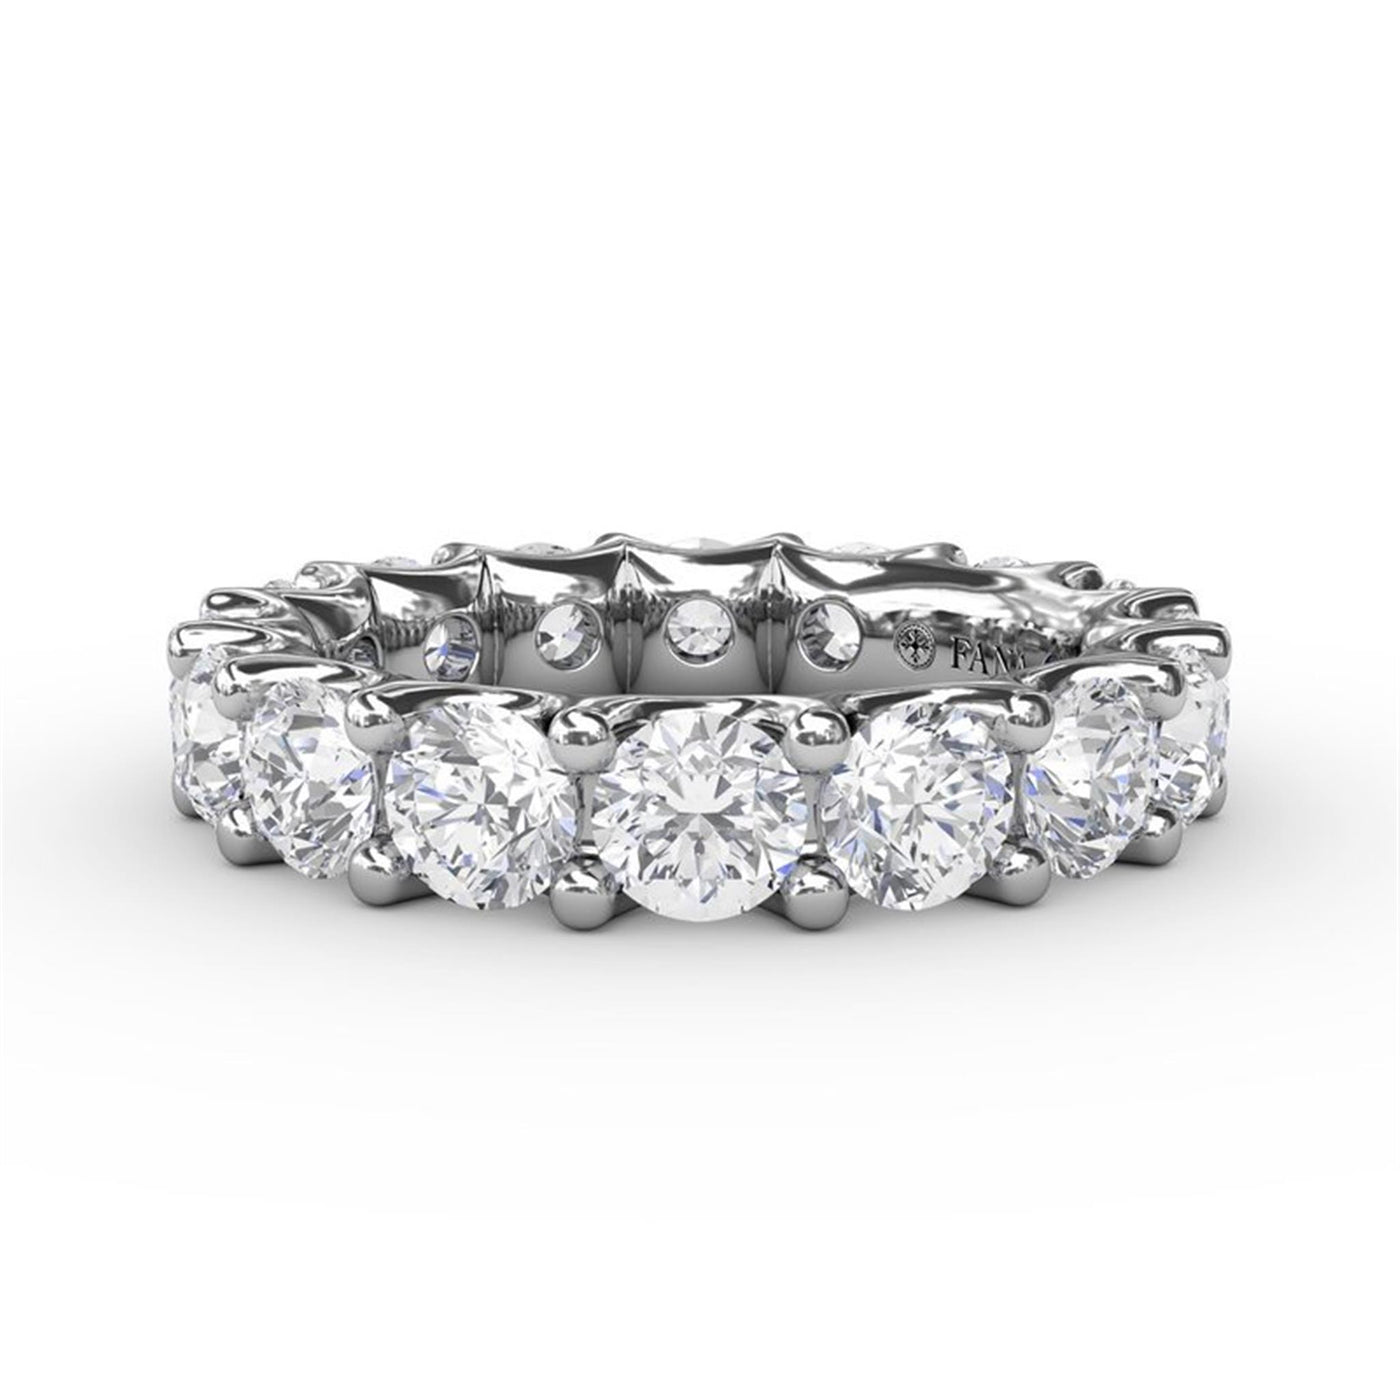 14K White Gold 3.60ctw Diamond Eternity Band 
Featuring a Polished Finish